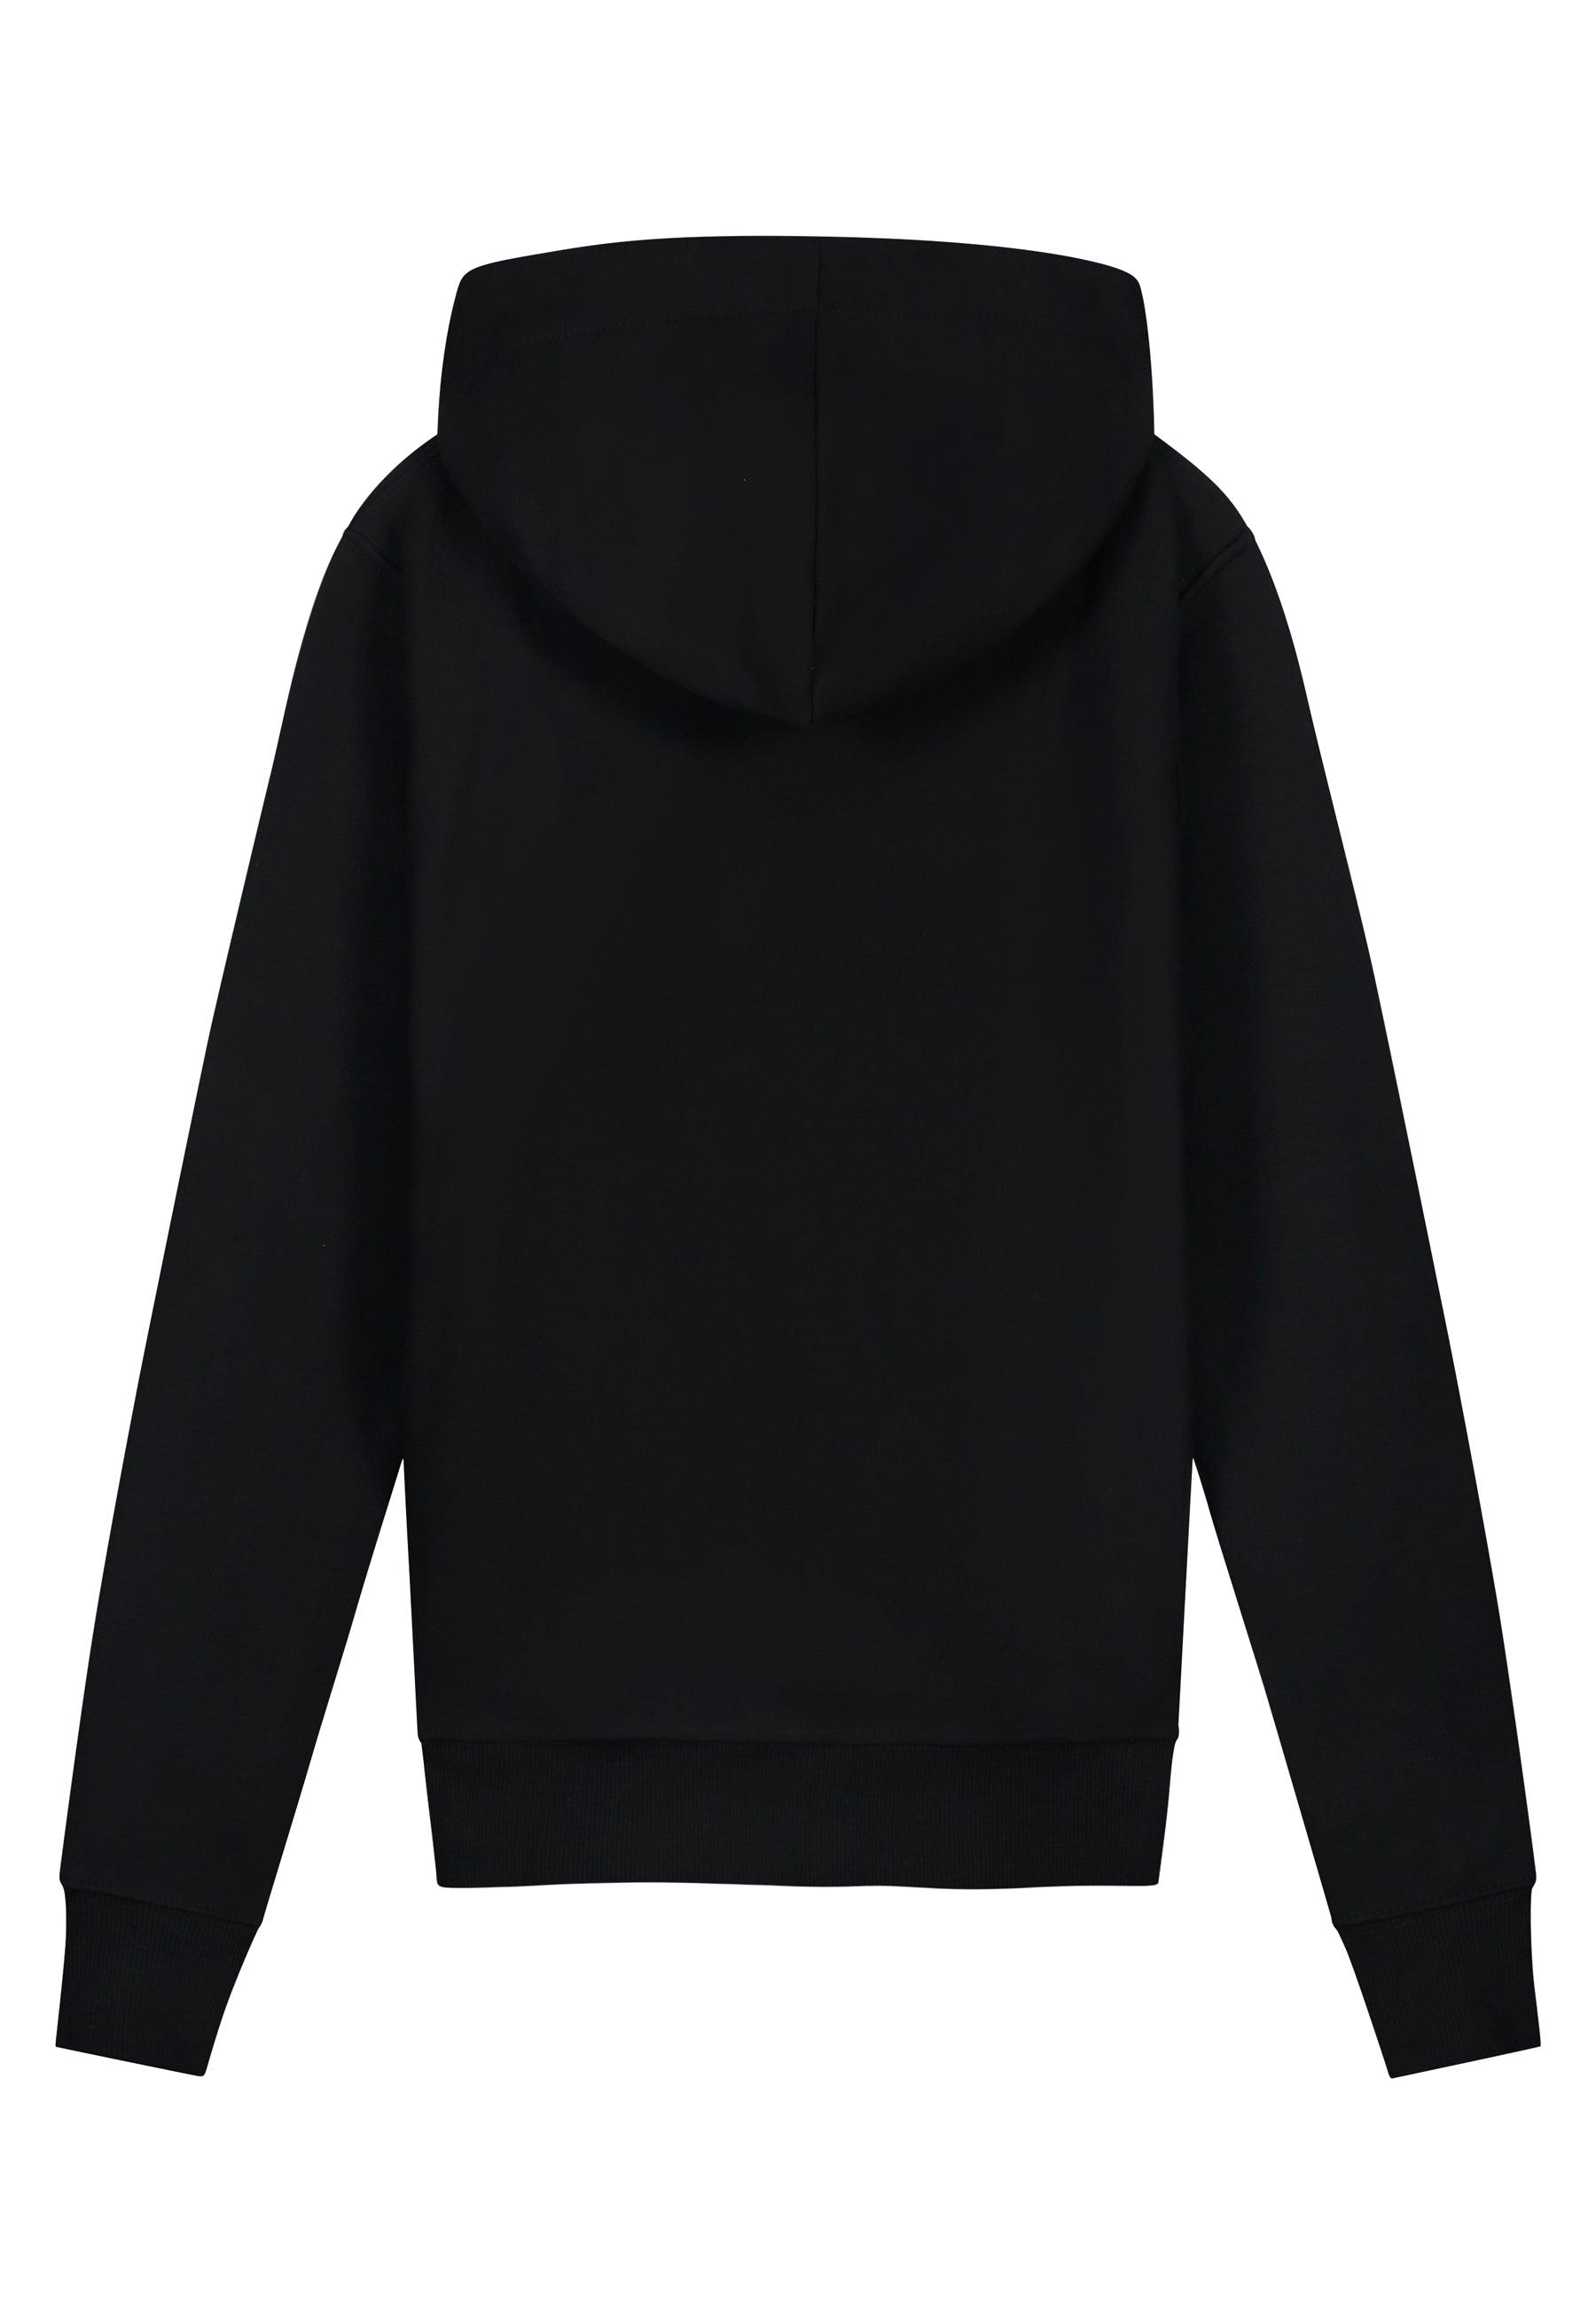 Black Artwork hoodie Amsterdam Collect The Label –